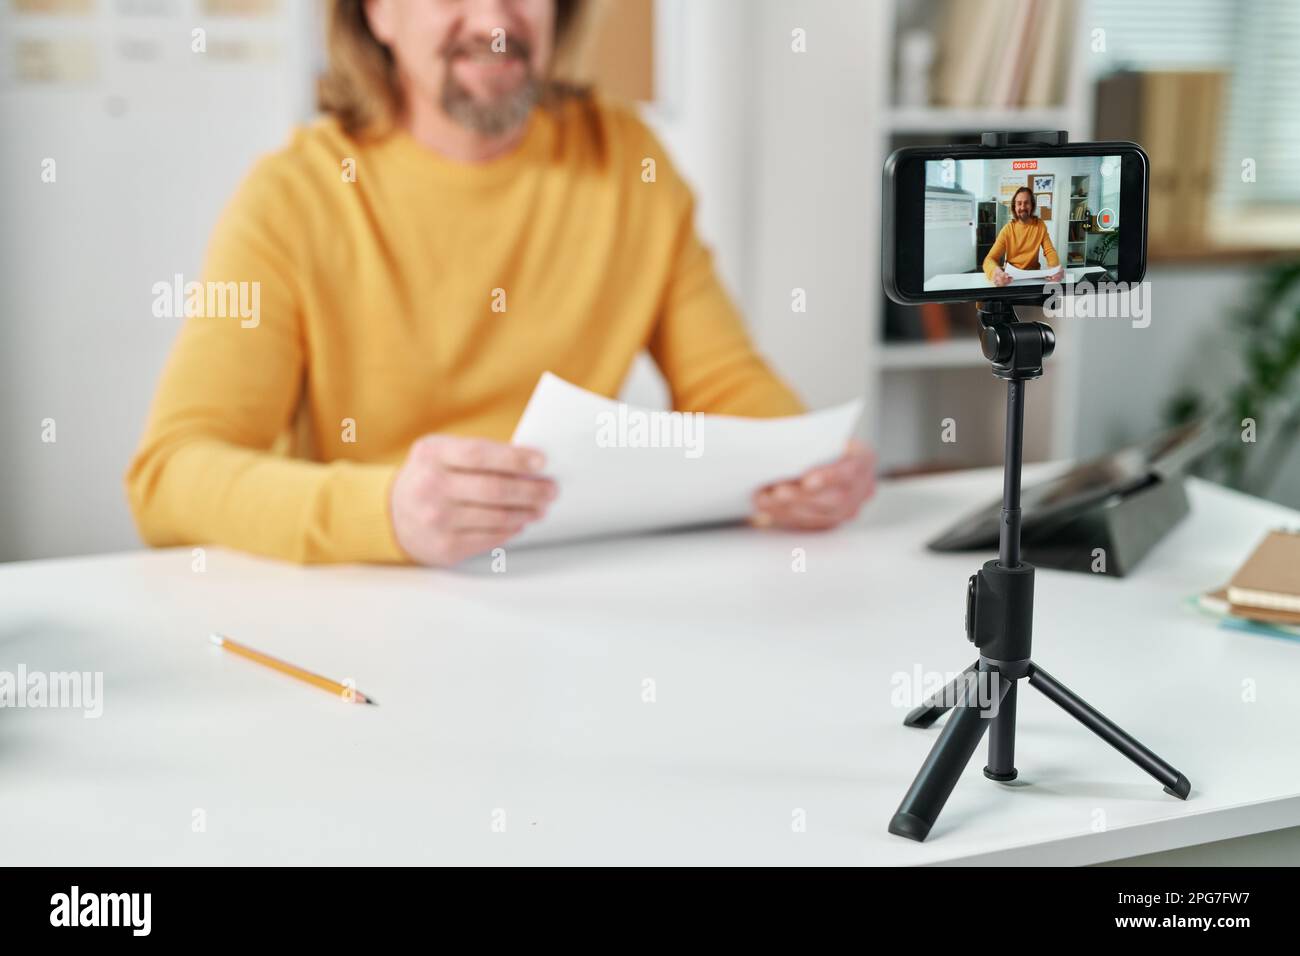 Selective focus of smartphone standing on tripod on table with teacher having online lesson Stock Photo